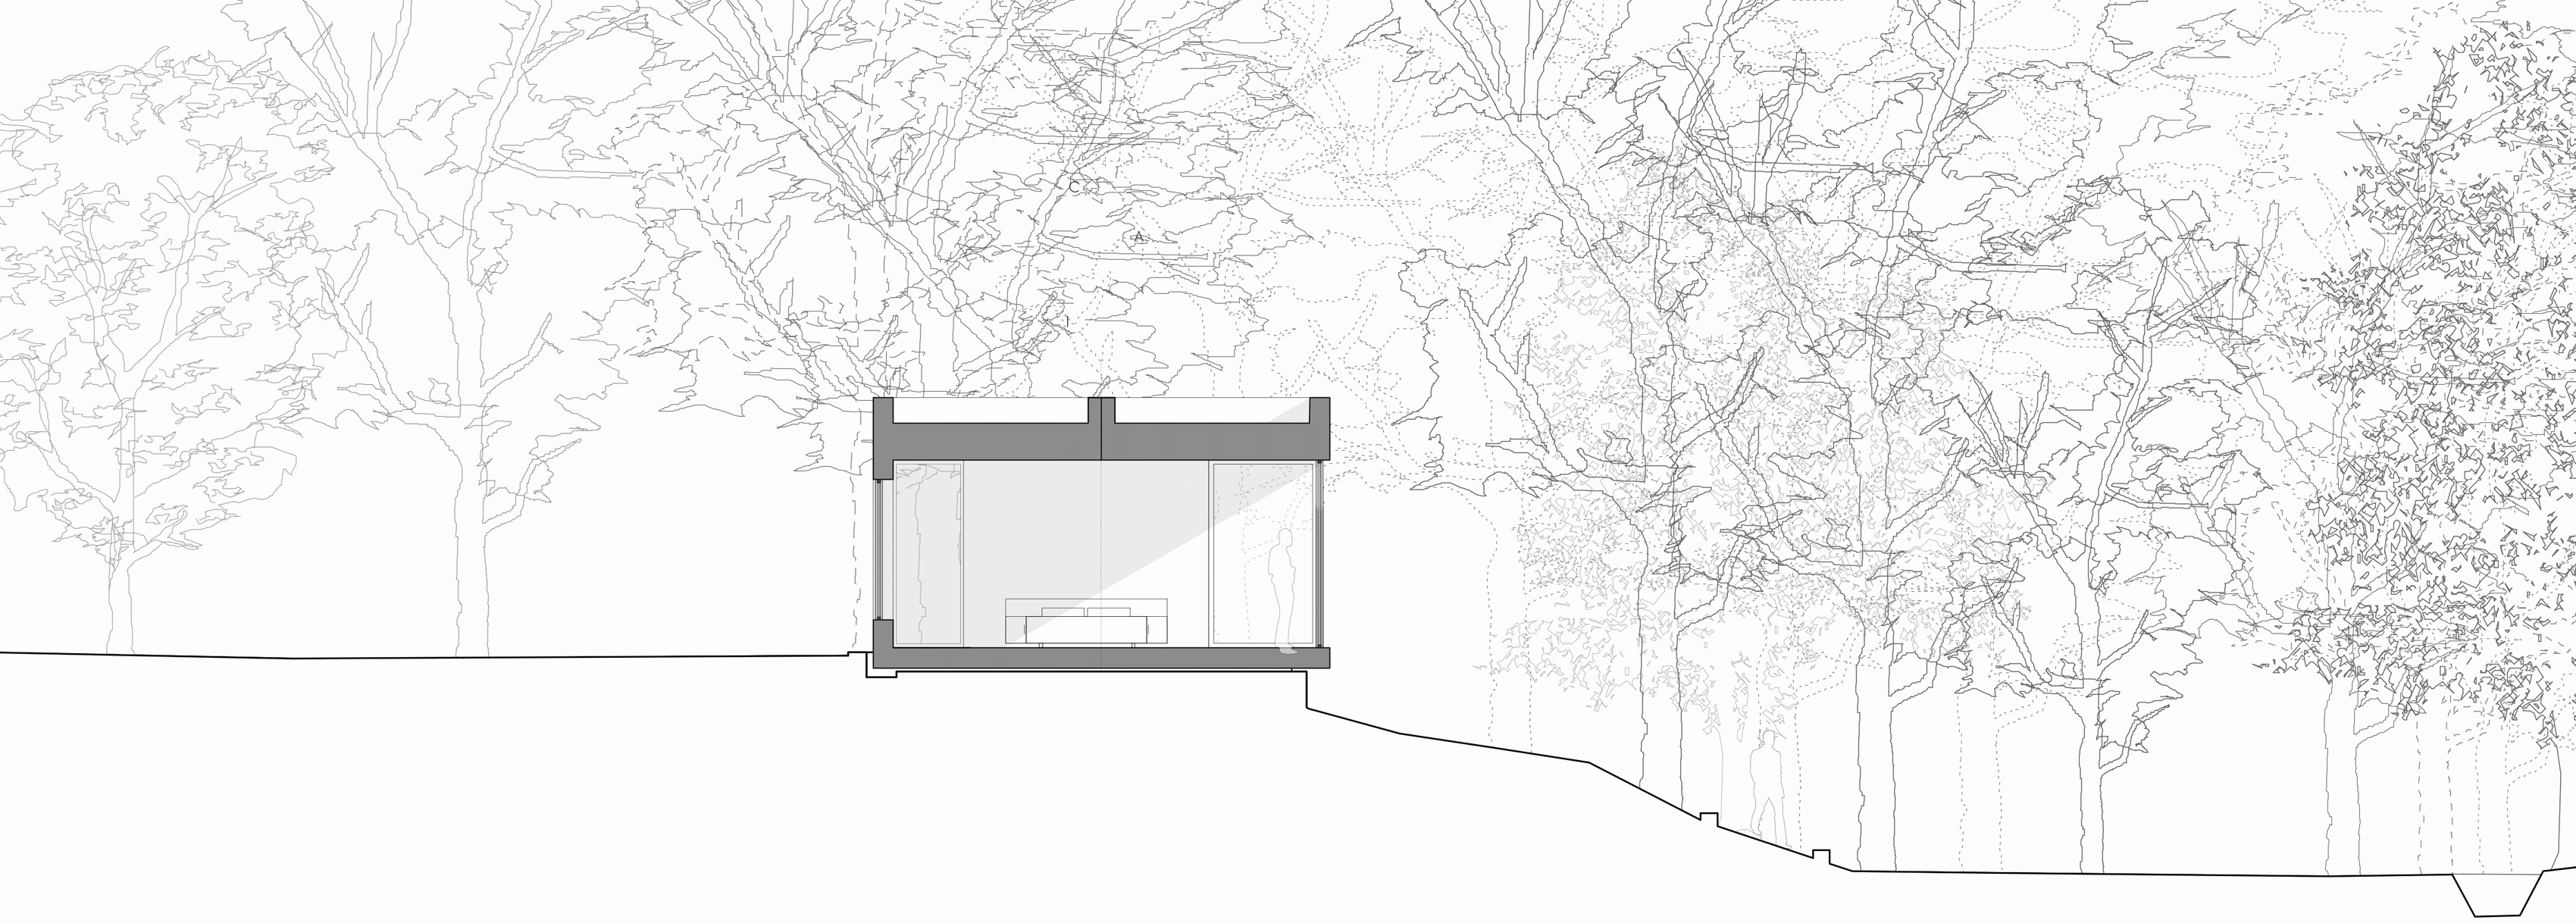 forest-lodge-pad-studio-architecture_dezeen_section-two